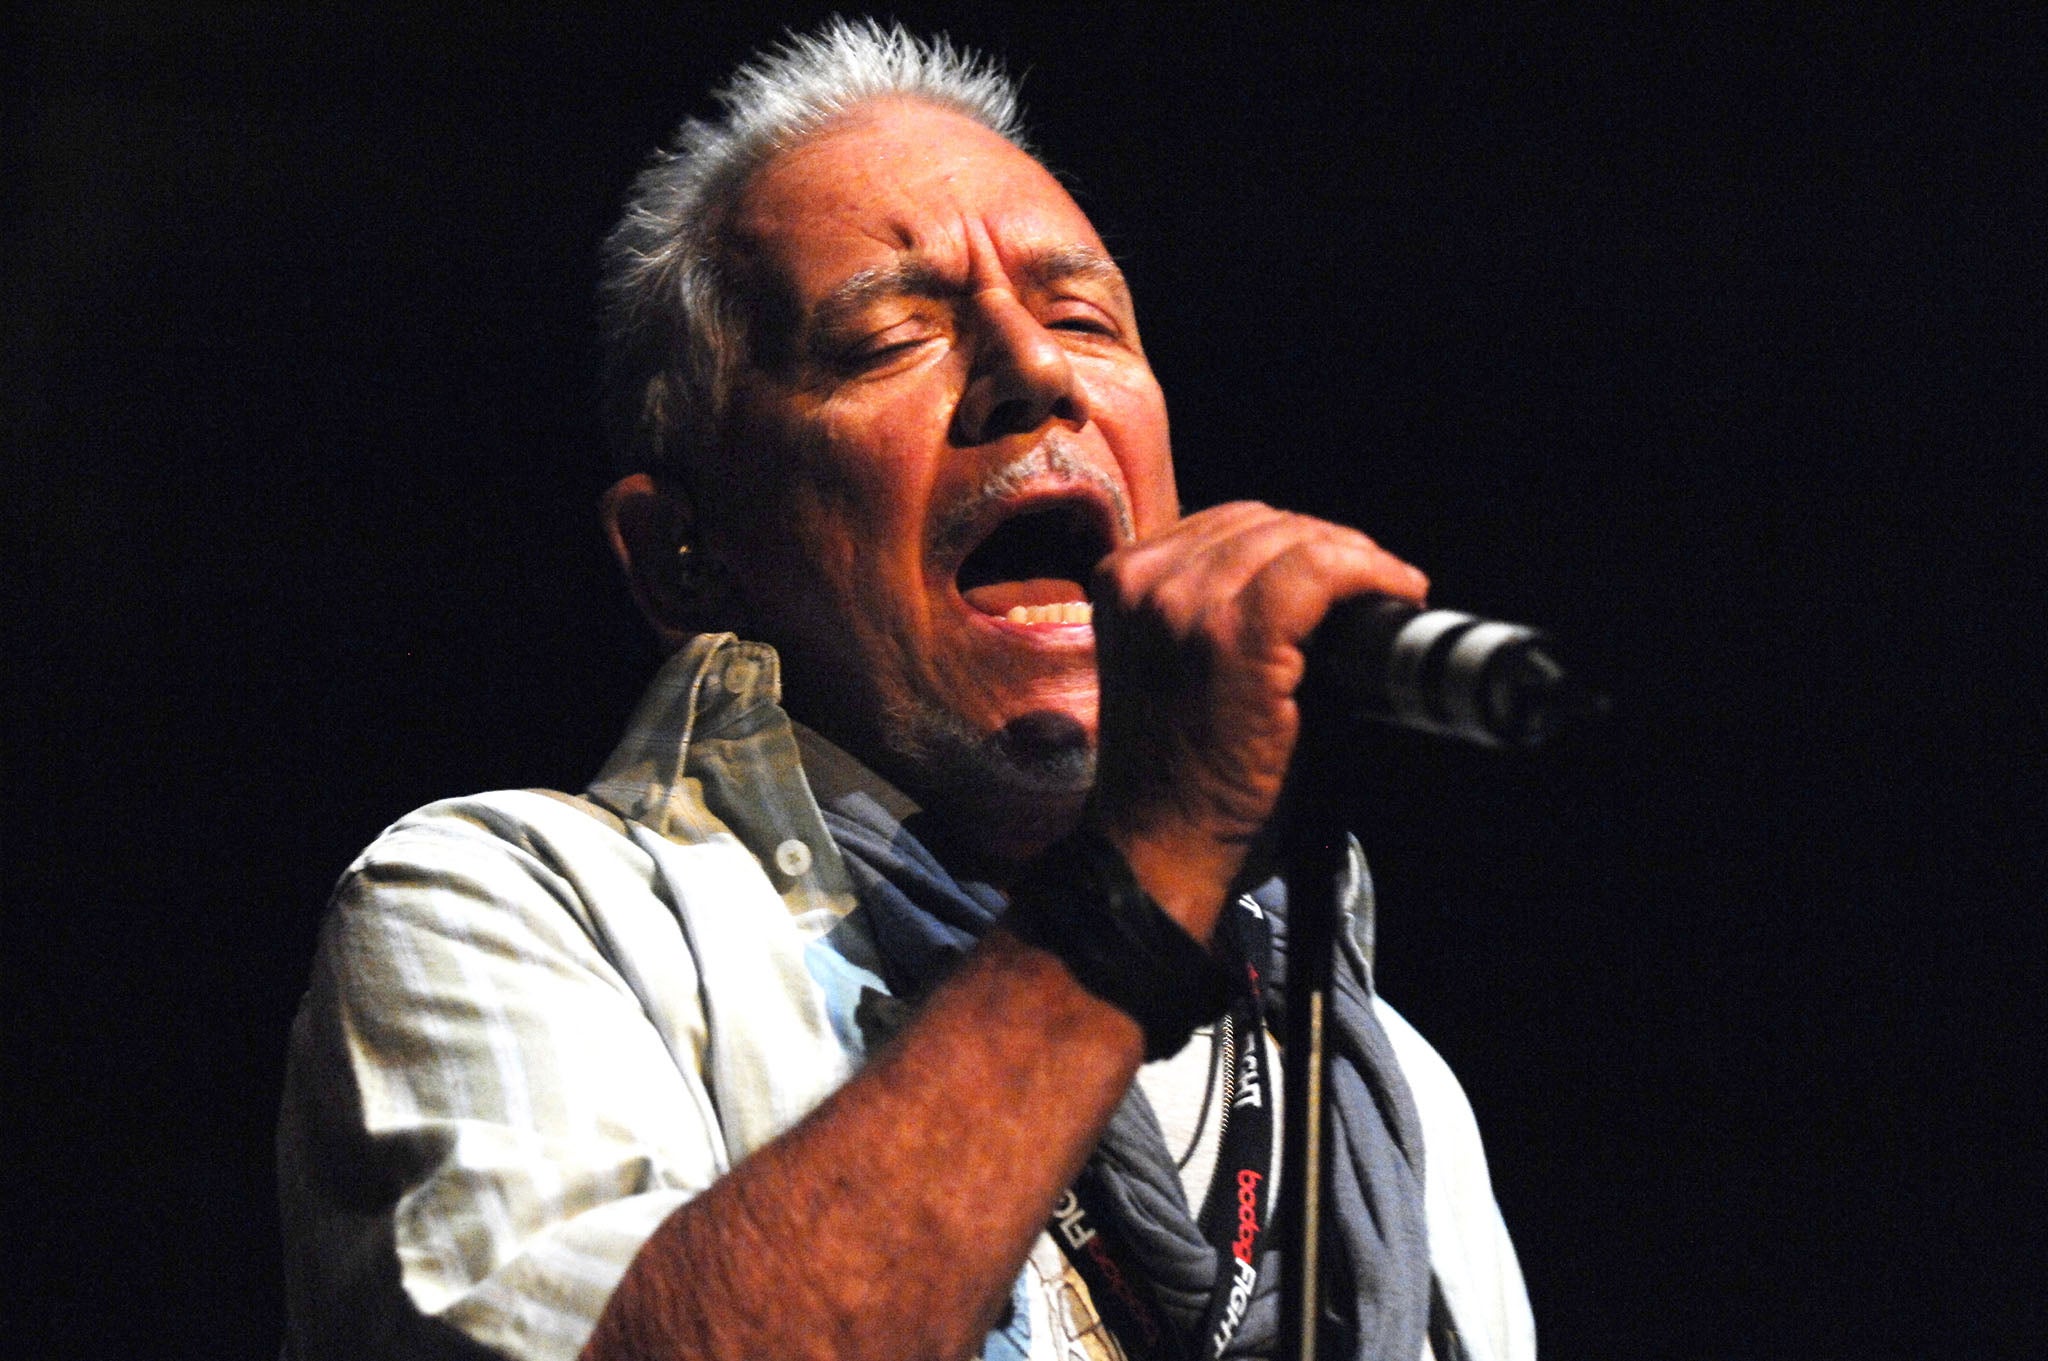 The Animals's Eric Burdon will perform in Israel as planned